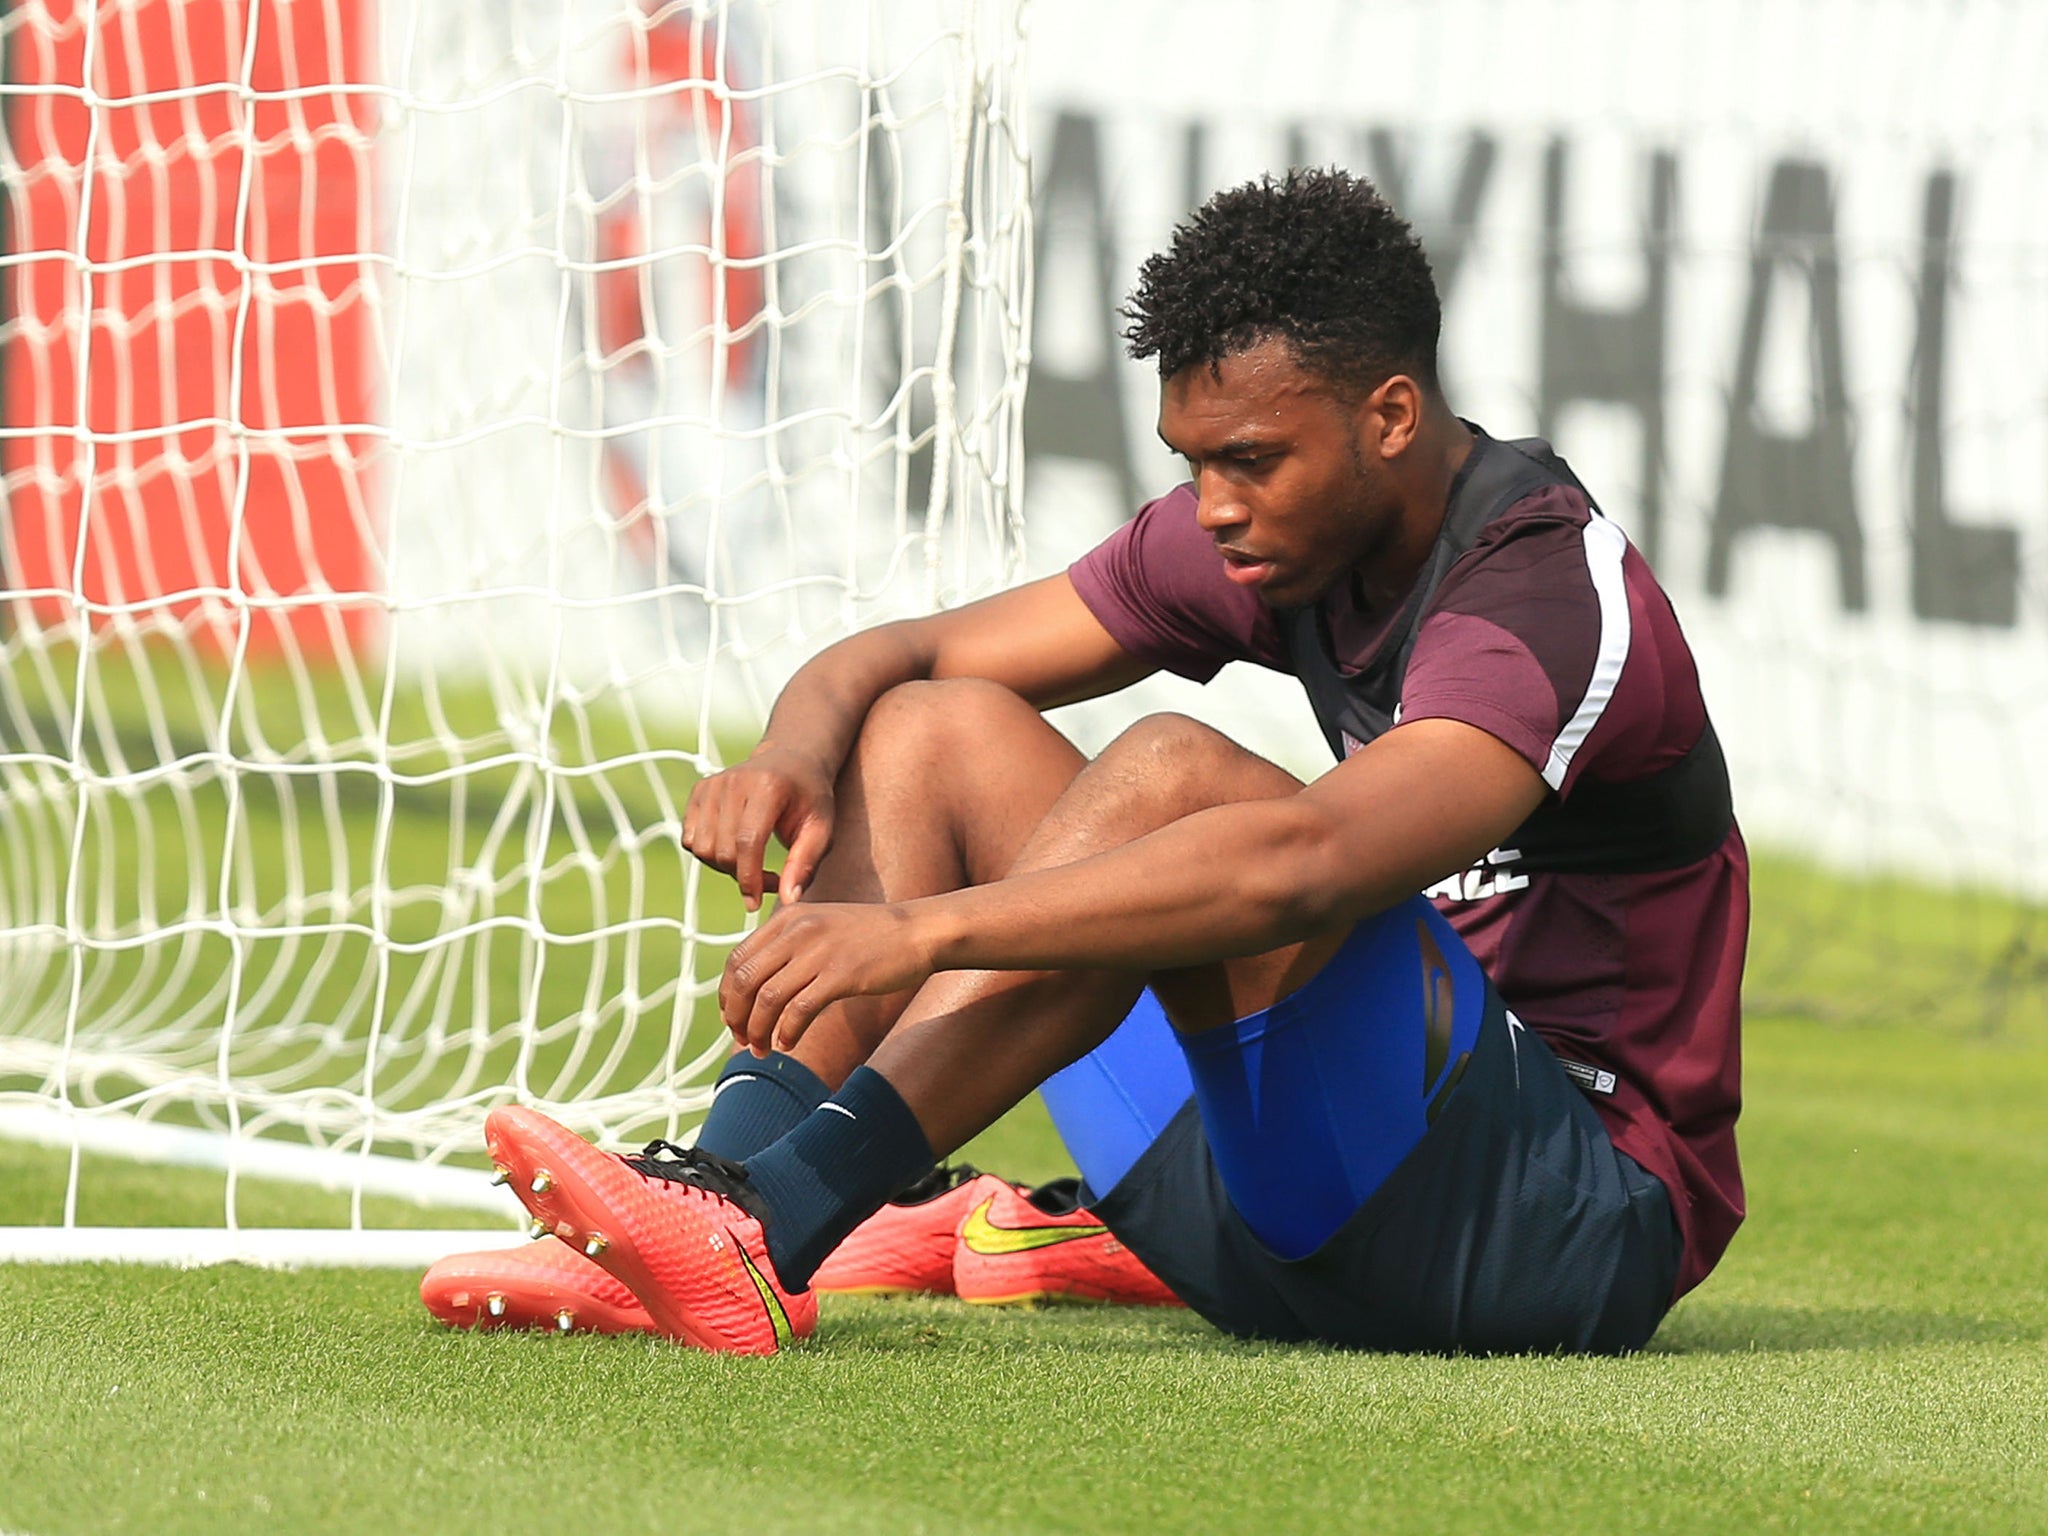 Daniel Sturridge would have gone to England’s camp with details of his routines